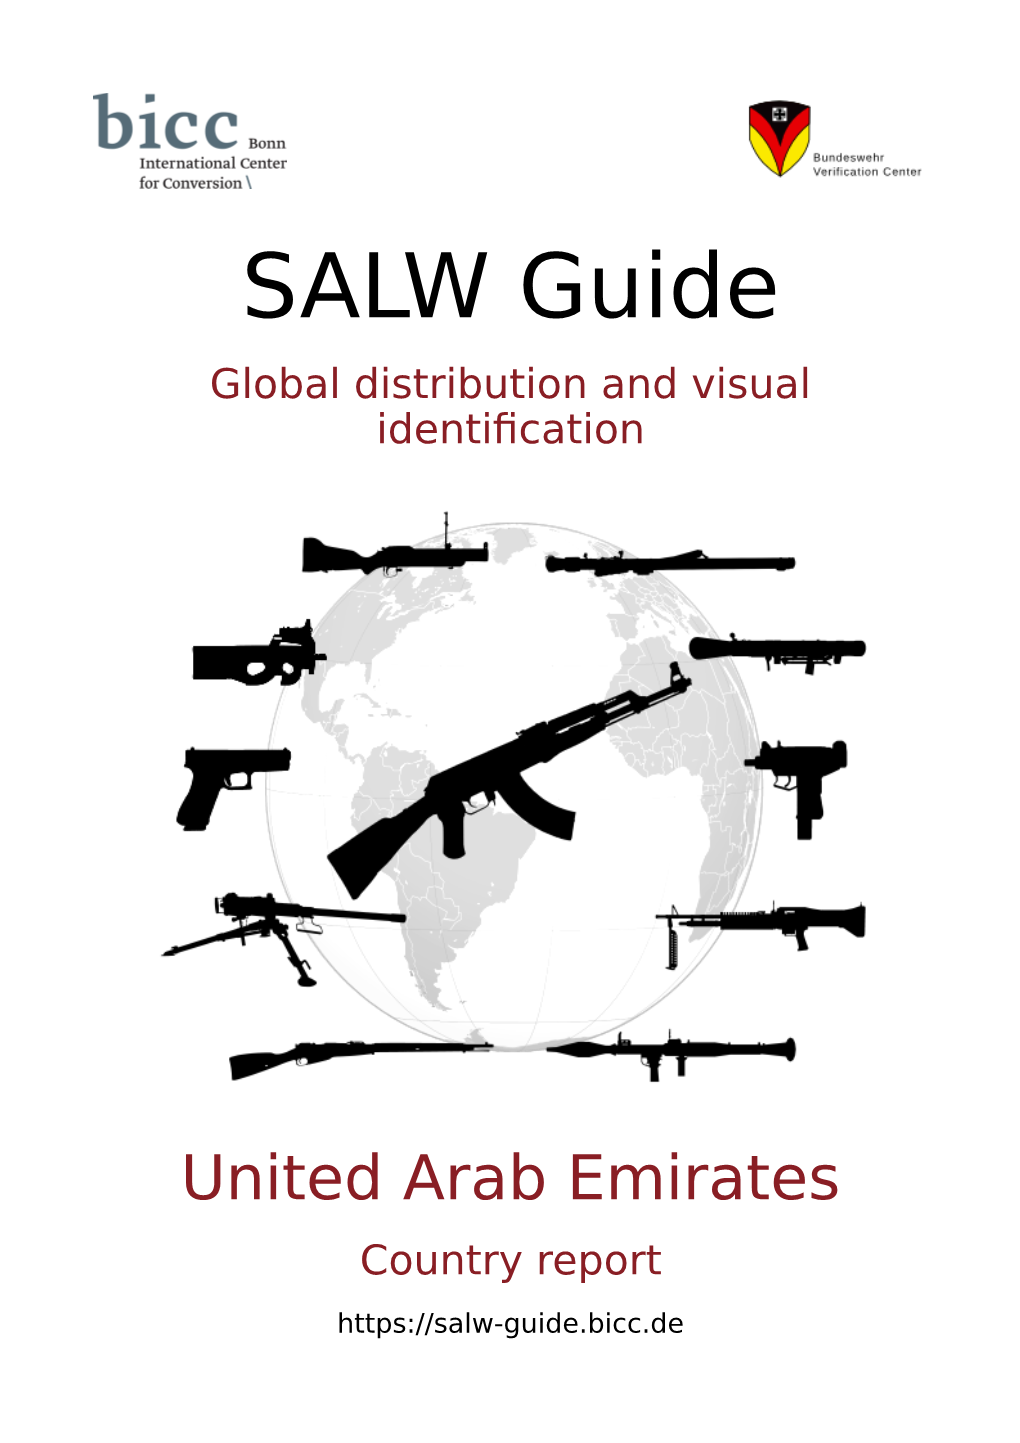 United Arab Emirates Country Report